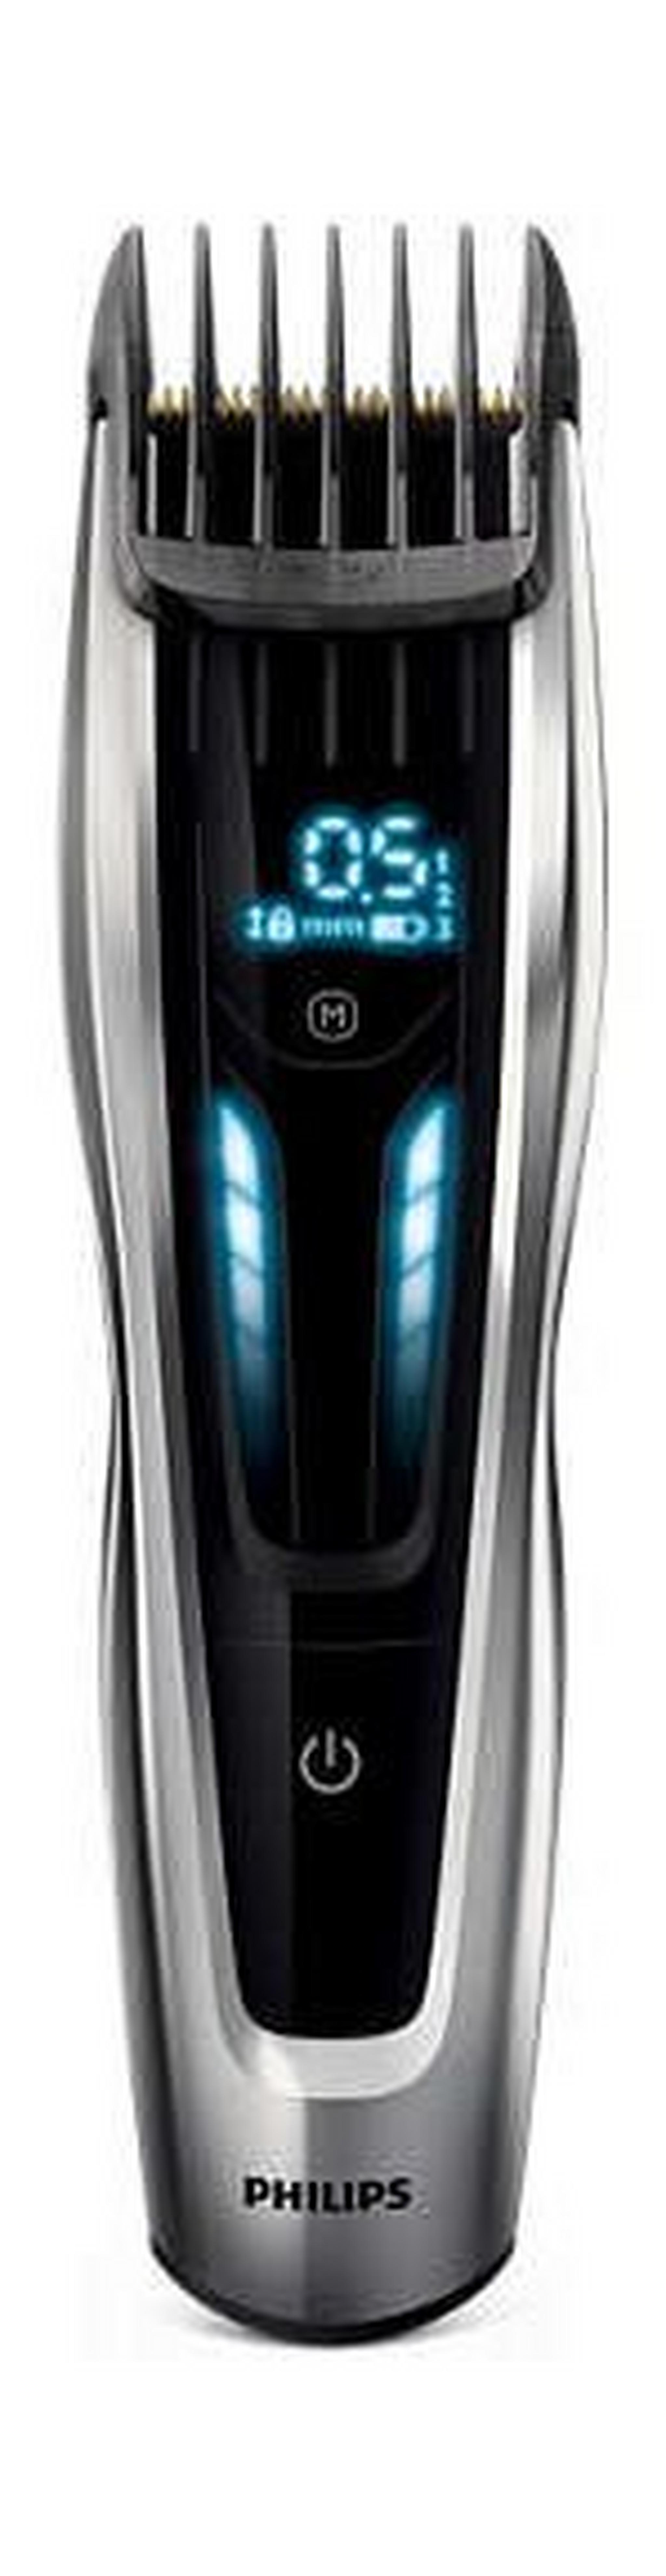 Philips Series 9000 Hair Clipper with Motorized Combs + Philips Satinelle Advanced Wet & Dry Epilator